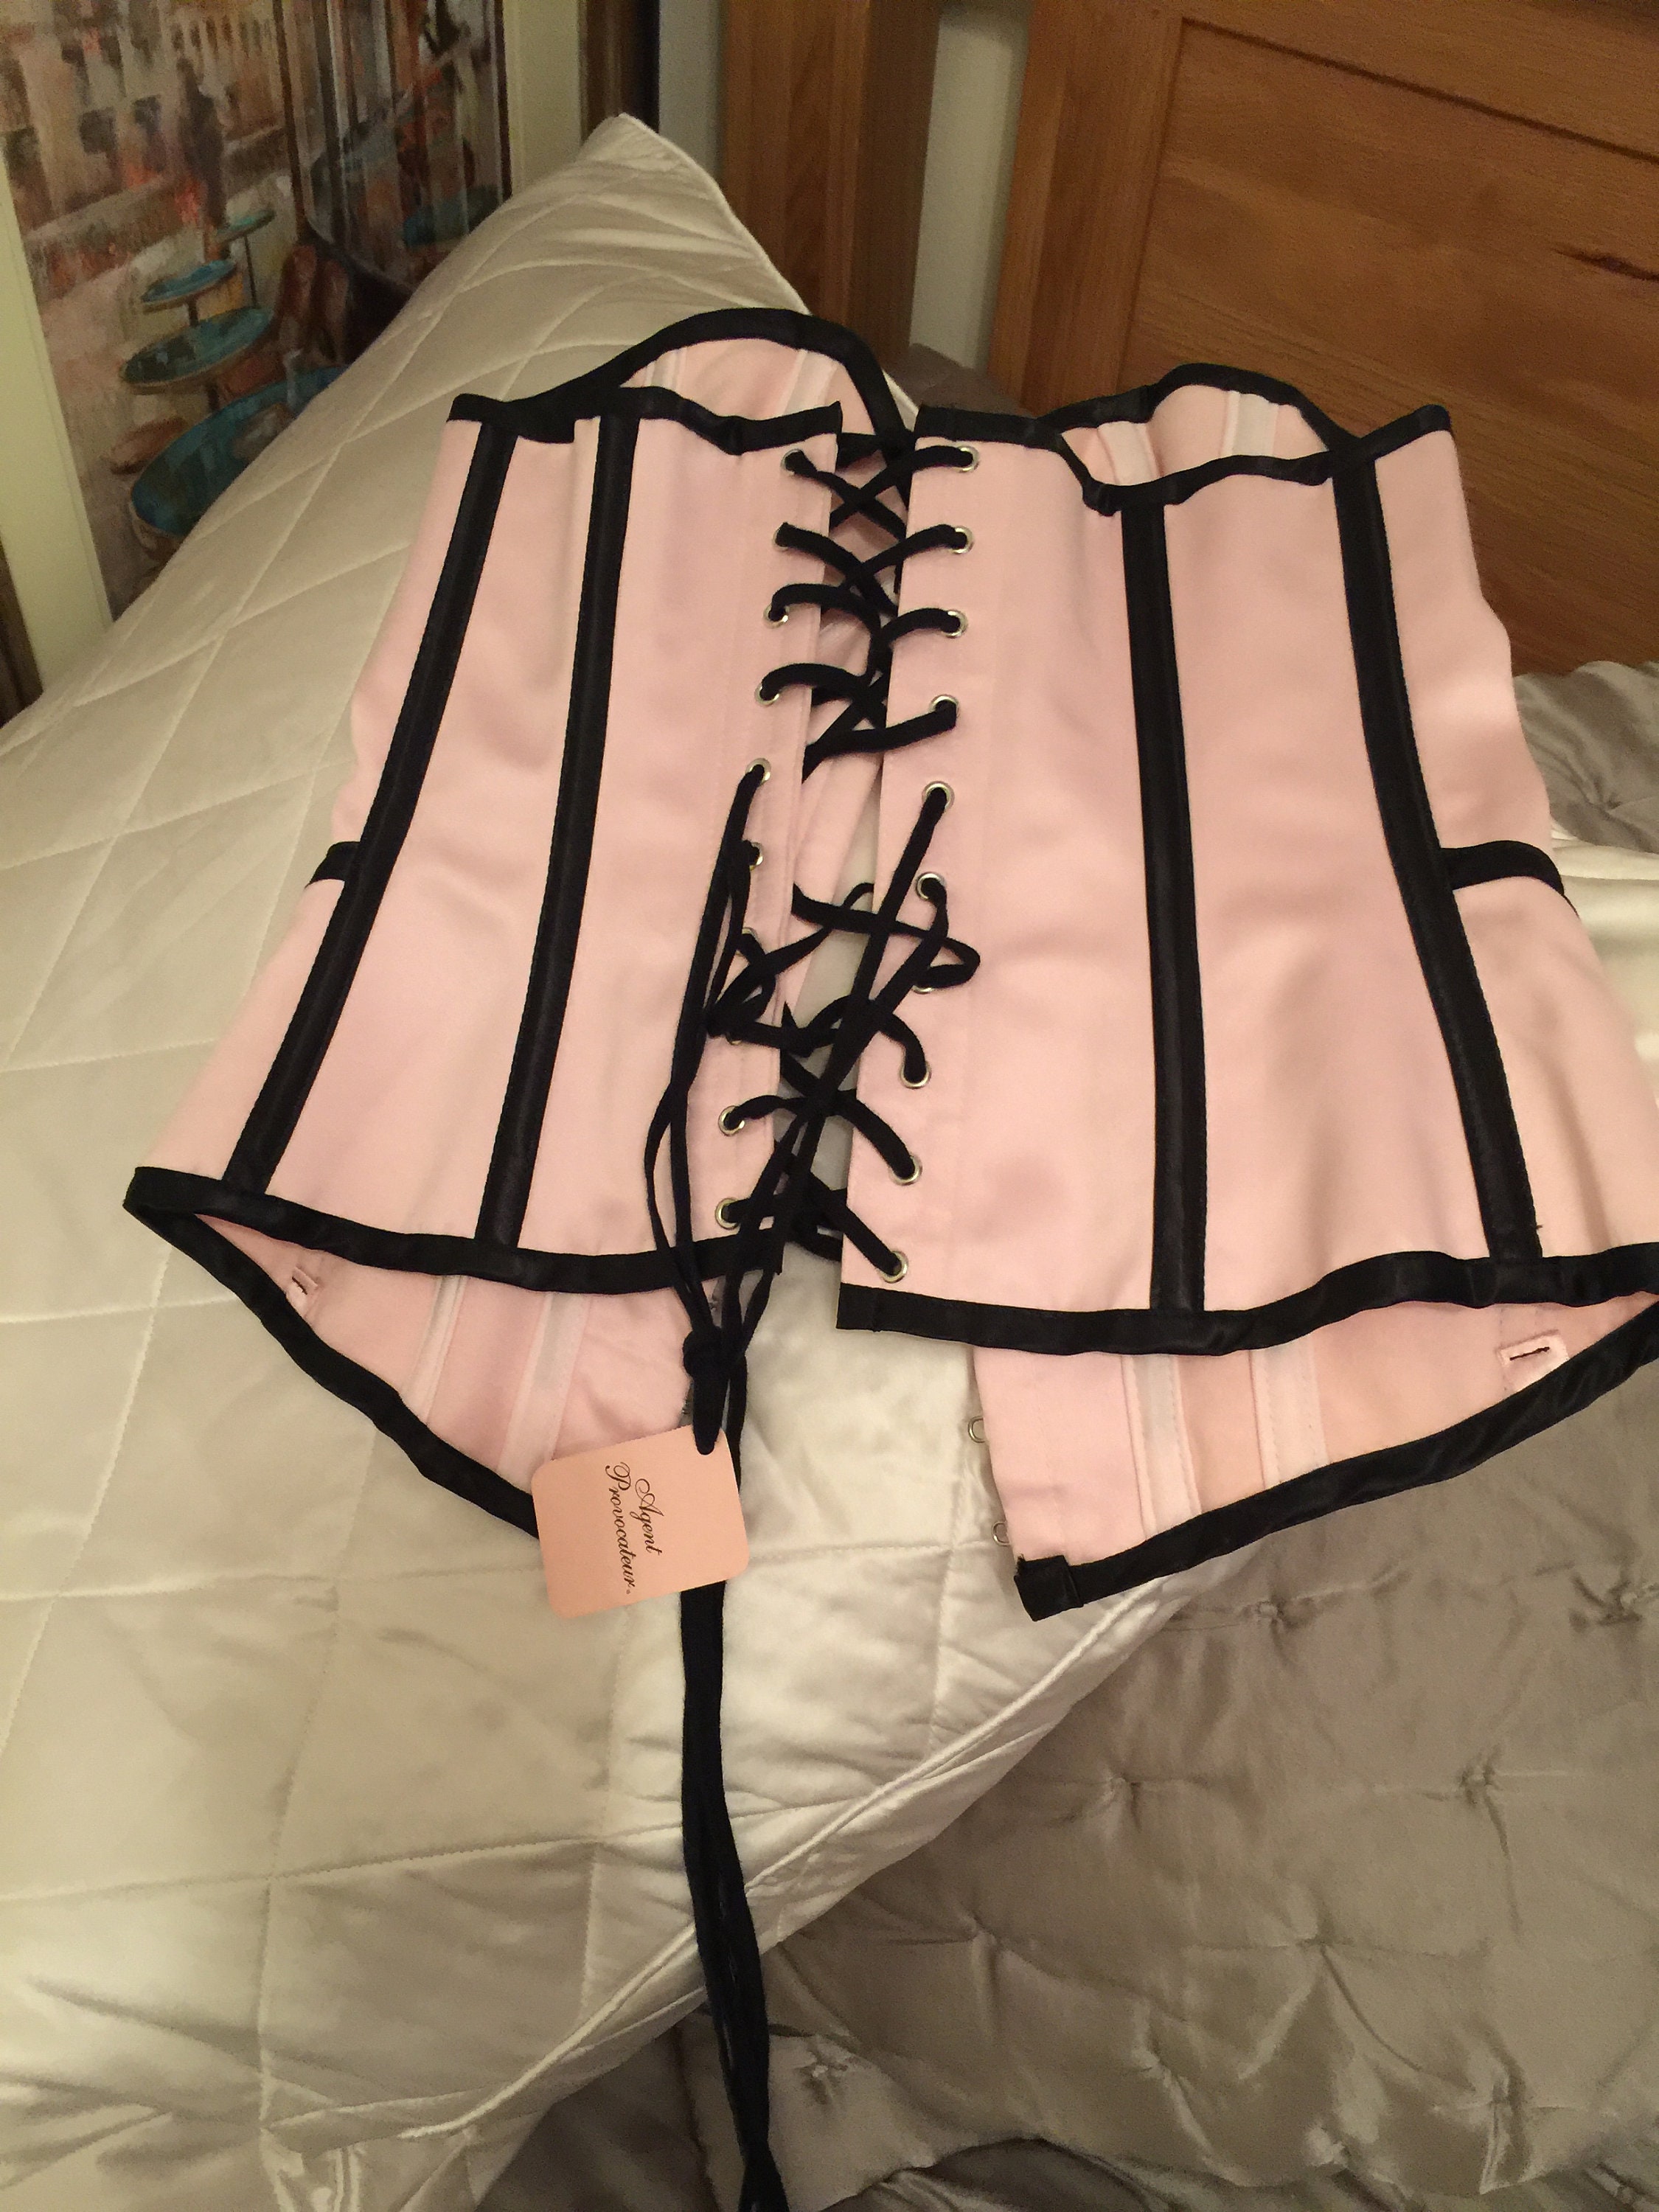 size large C or D cup Agent provocateur pink corset with green dots